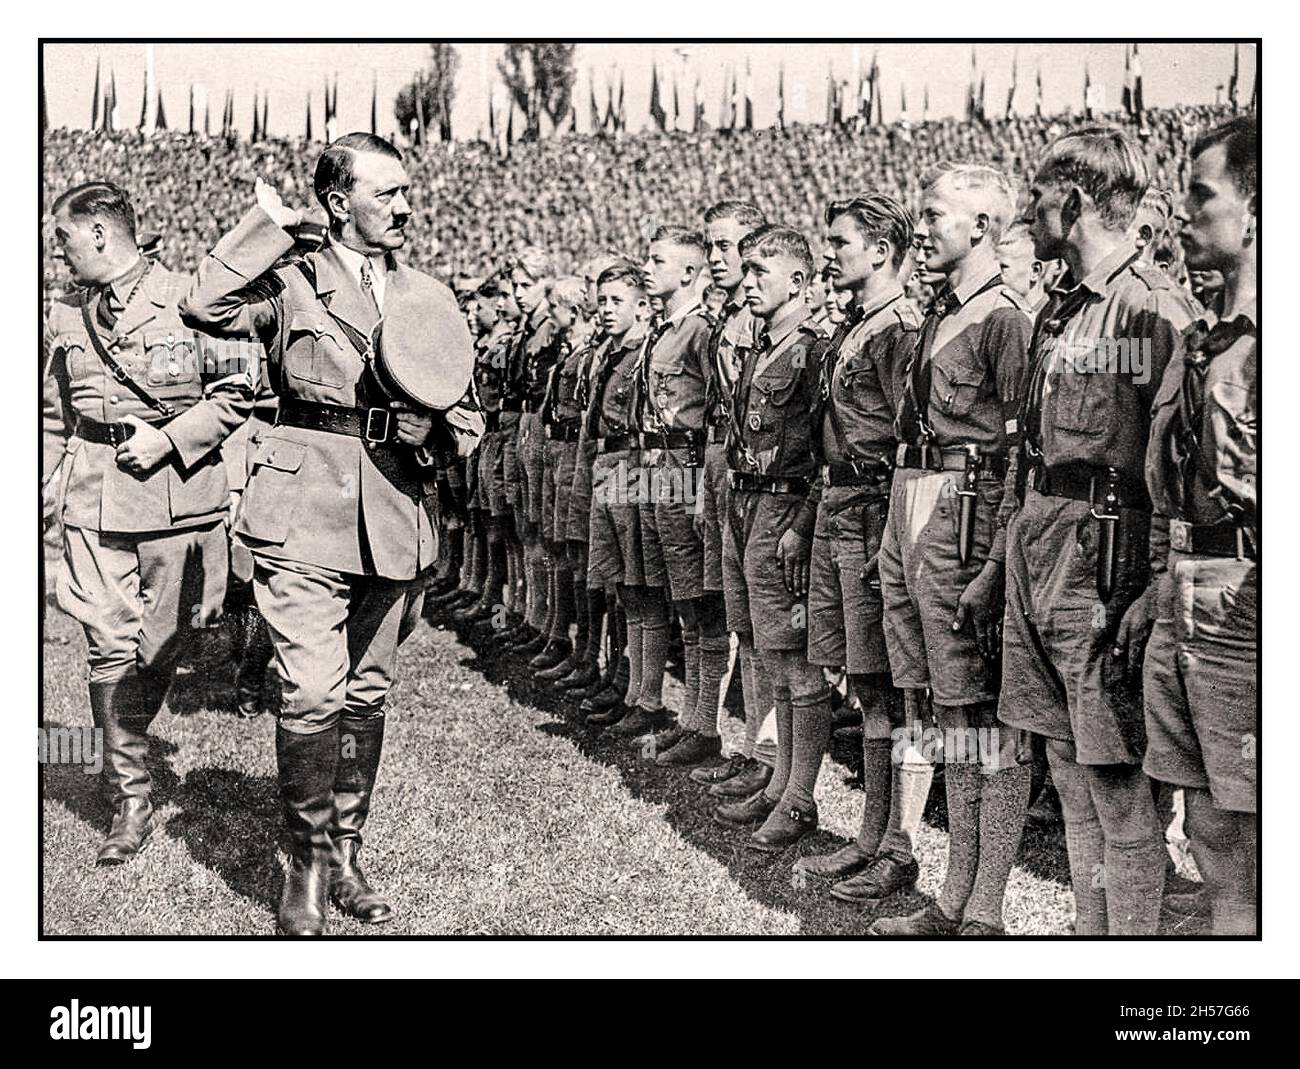 ADOLF HITLER  salutes a uniformed parade of Hitler Youth 'Hitlerjugend' wearing swastika armbands at a 1930s 'Nuremberg Rally in Nuremberg Nazi Germany - Stock Photo